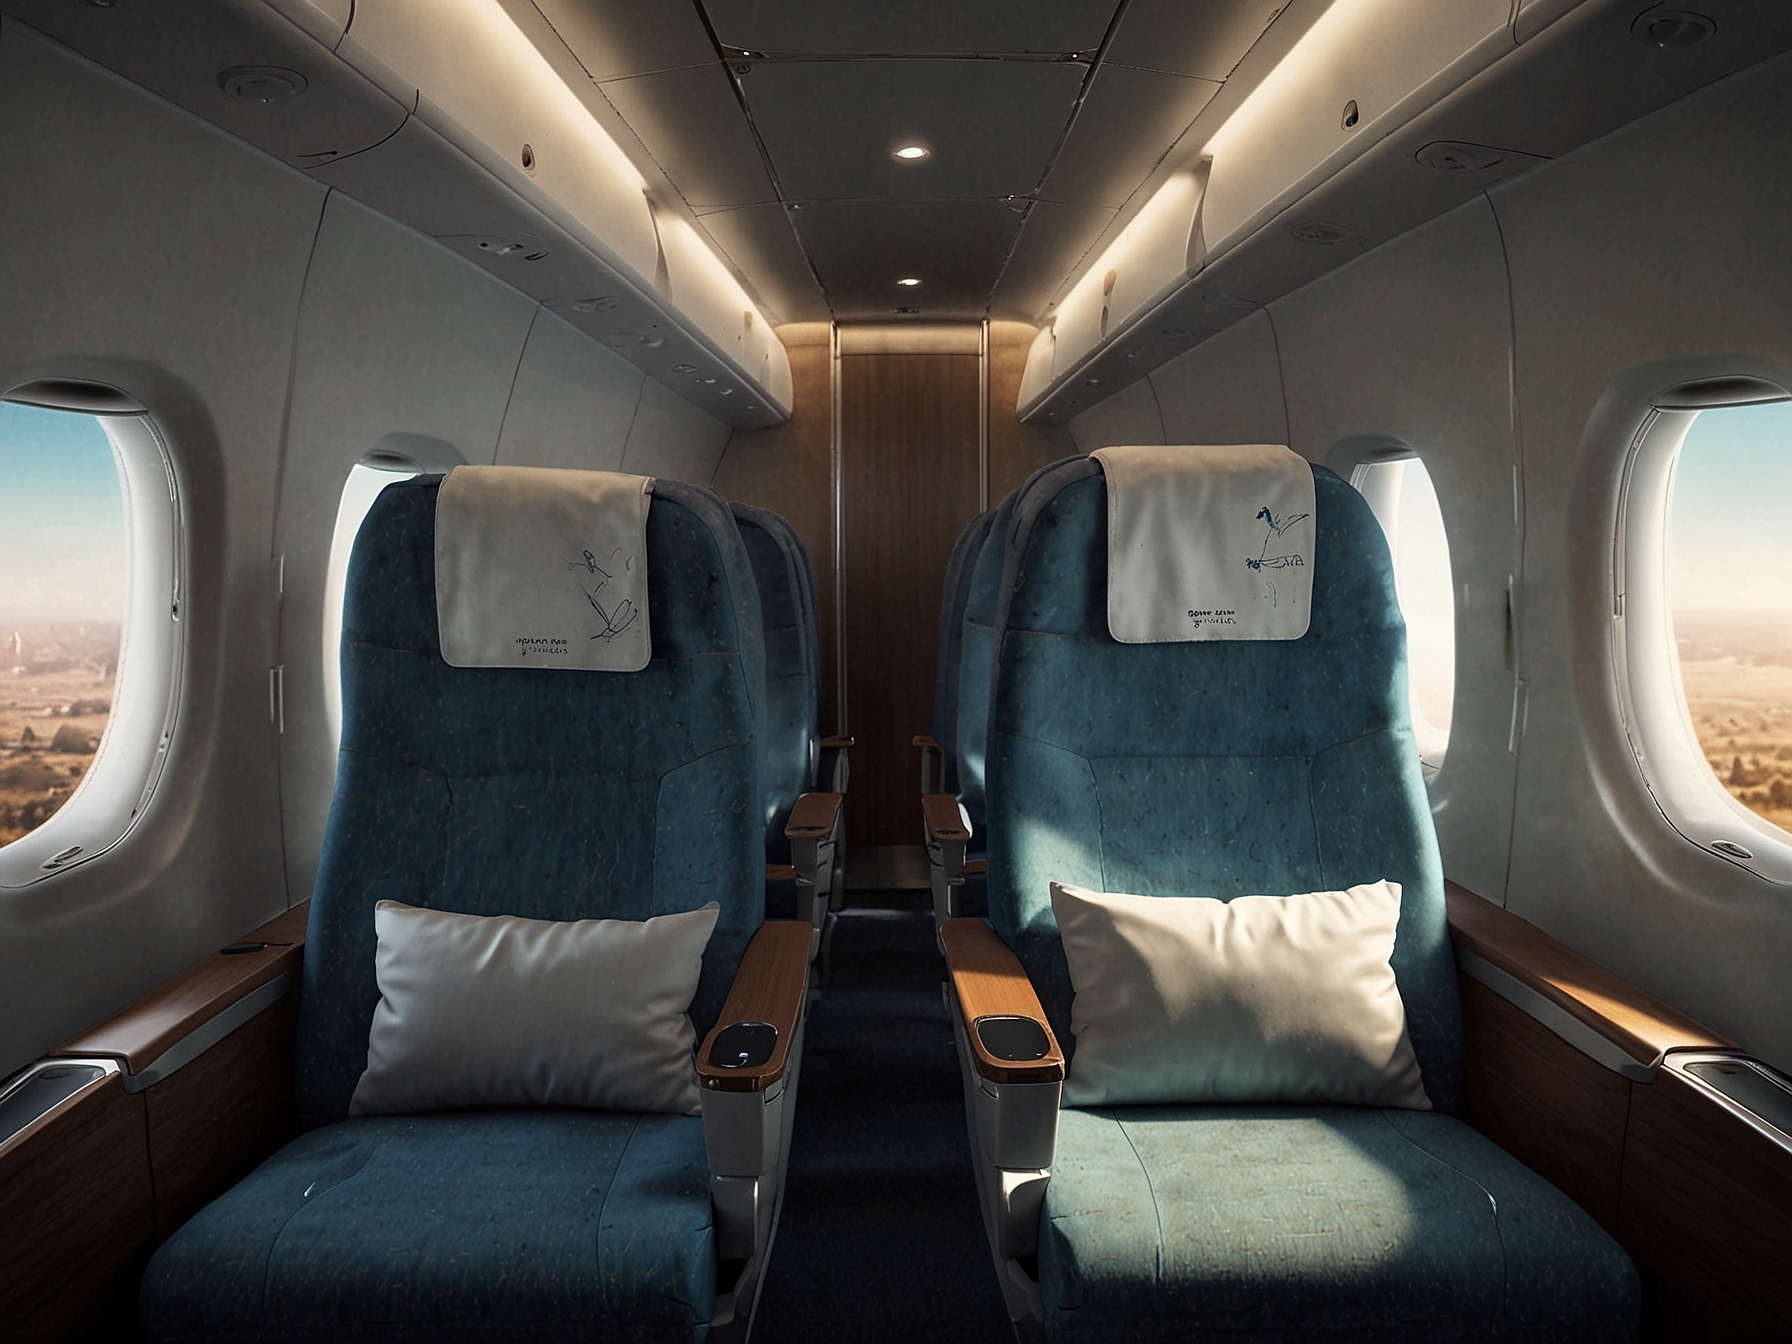 The interior of French bee's Airbus A350-900 Premium Class featuring spacious 2-3-2 seating arrangements with ample legroom, footrests, and adjustable headrests for passengers' comfort.